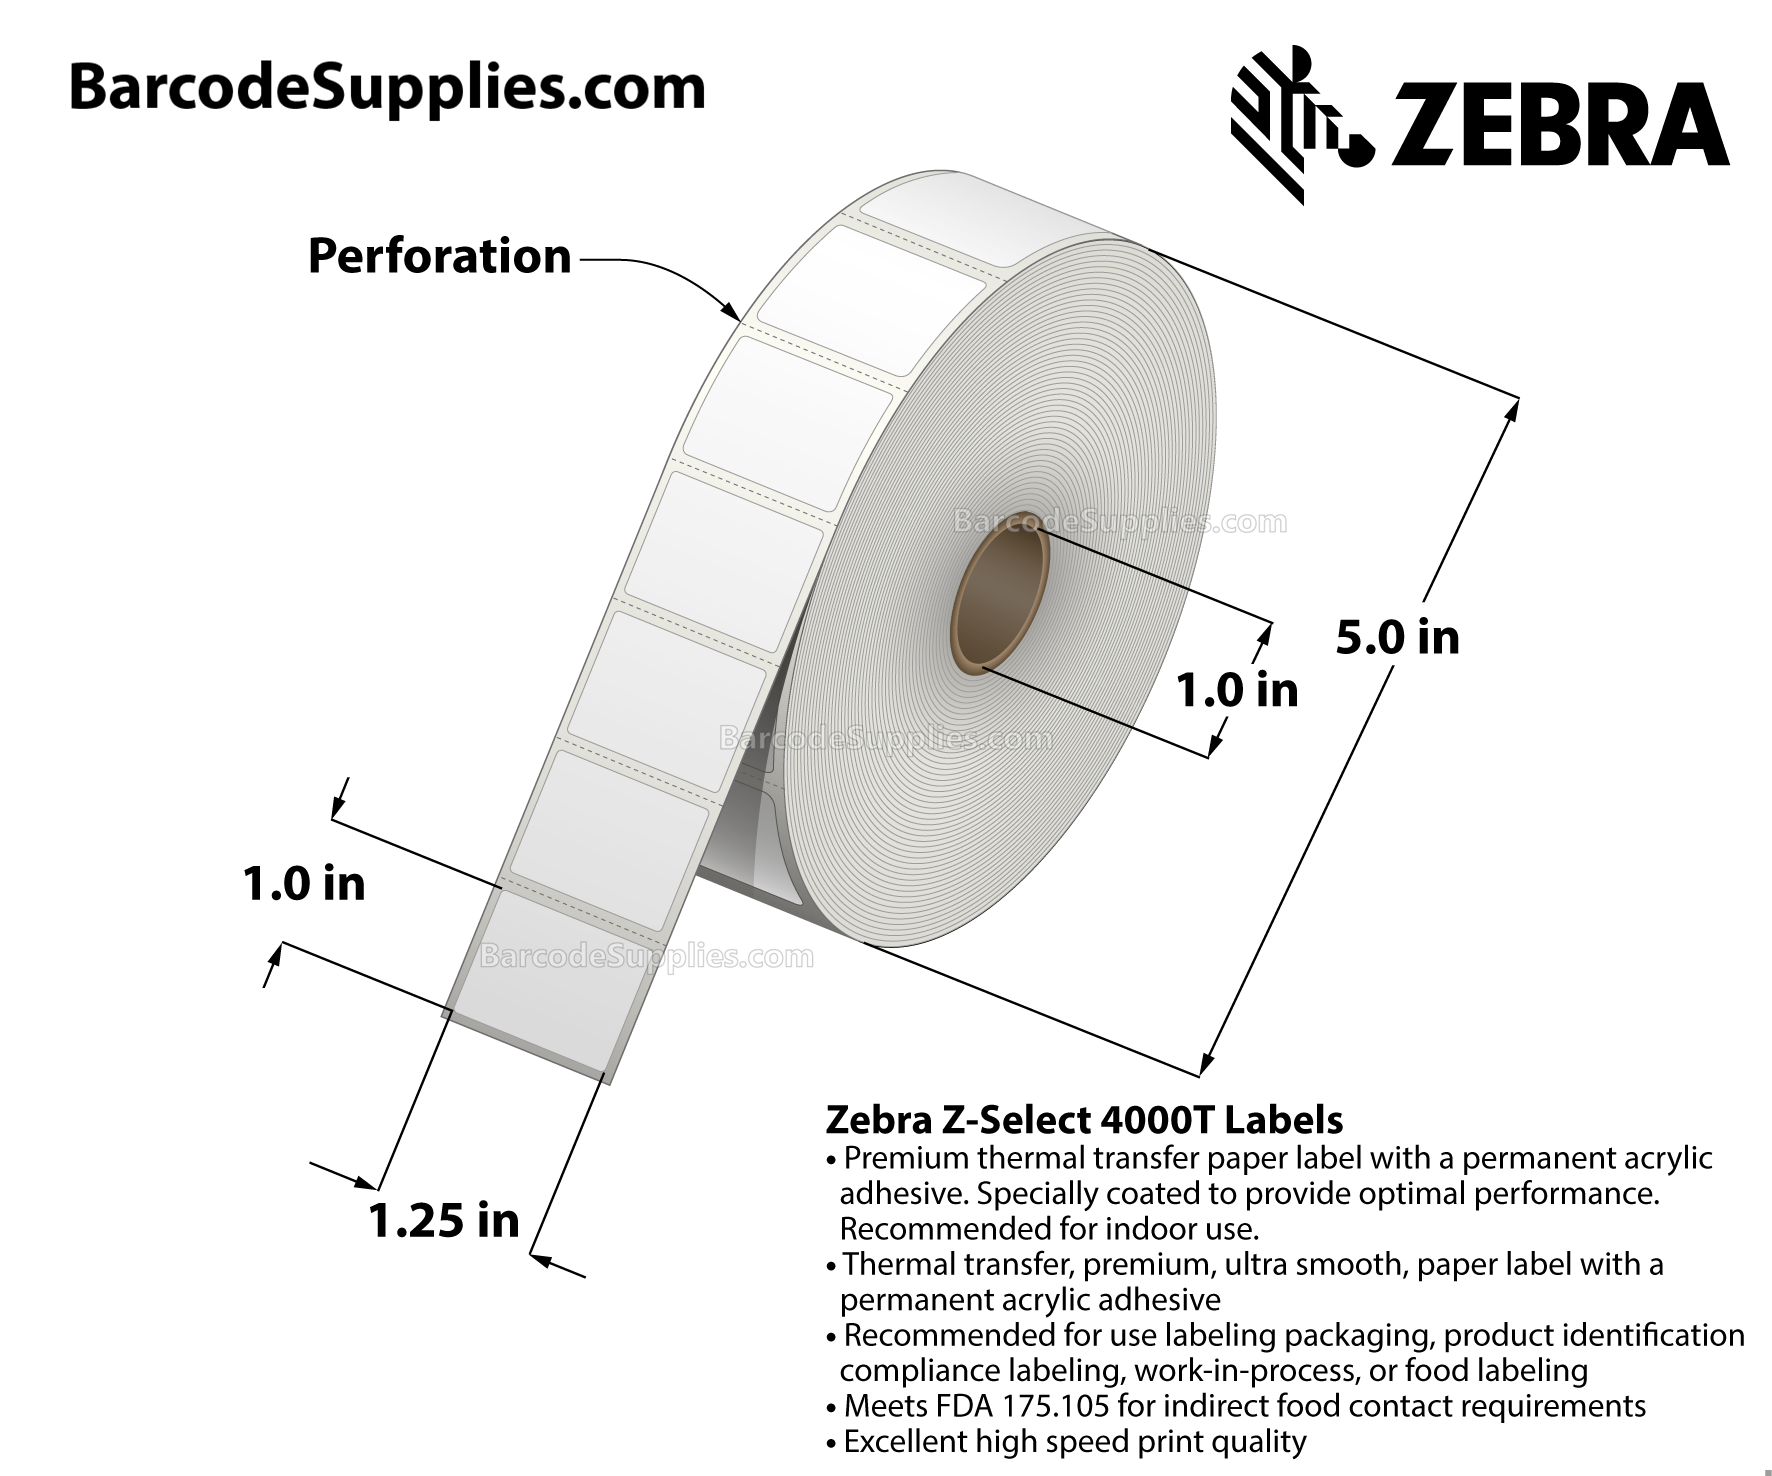 1.25 x 1 Thermal Transfer White Z-Select 4000T Labels With Permanent Adhesive - Perforated - 2580 Labels Per Roll - Carton Of 6 Rolls - 15480 Labels Total - MPN: 10009523